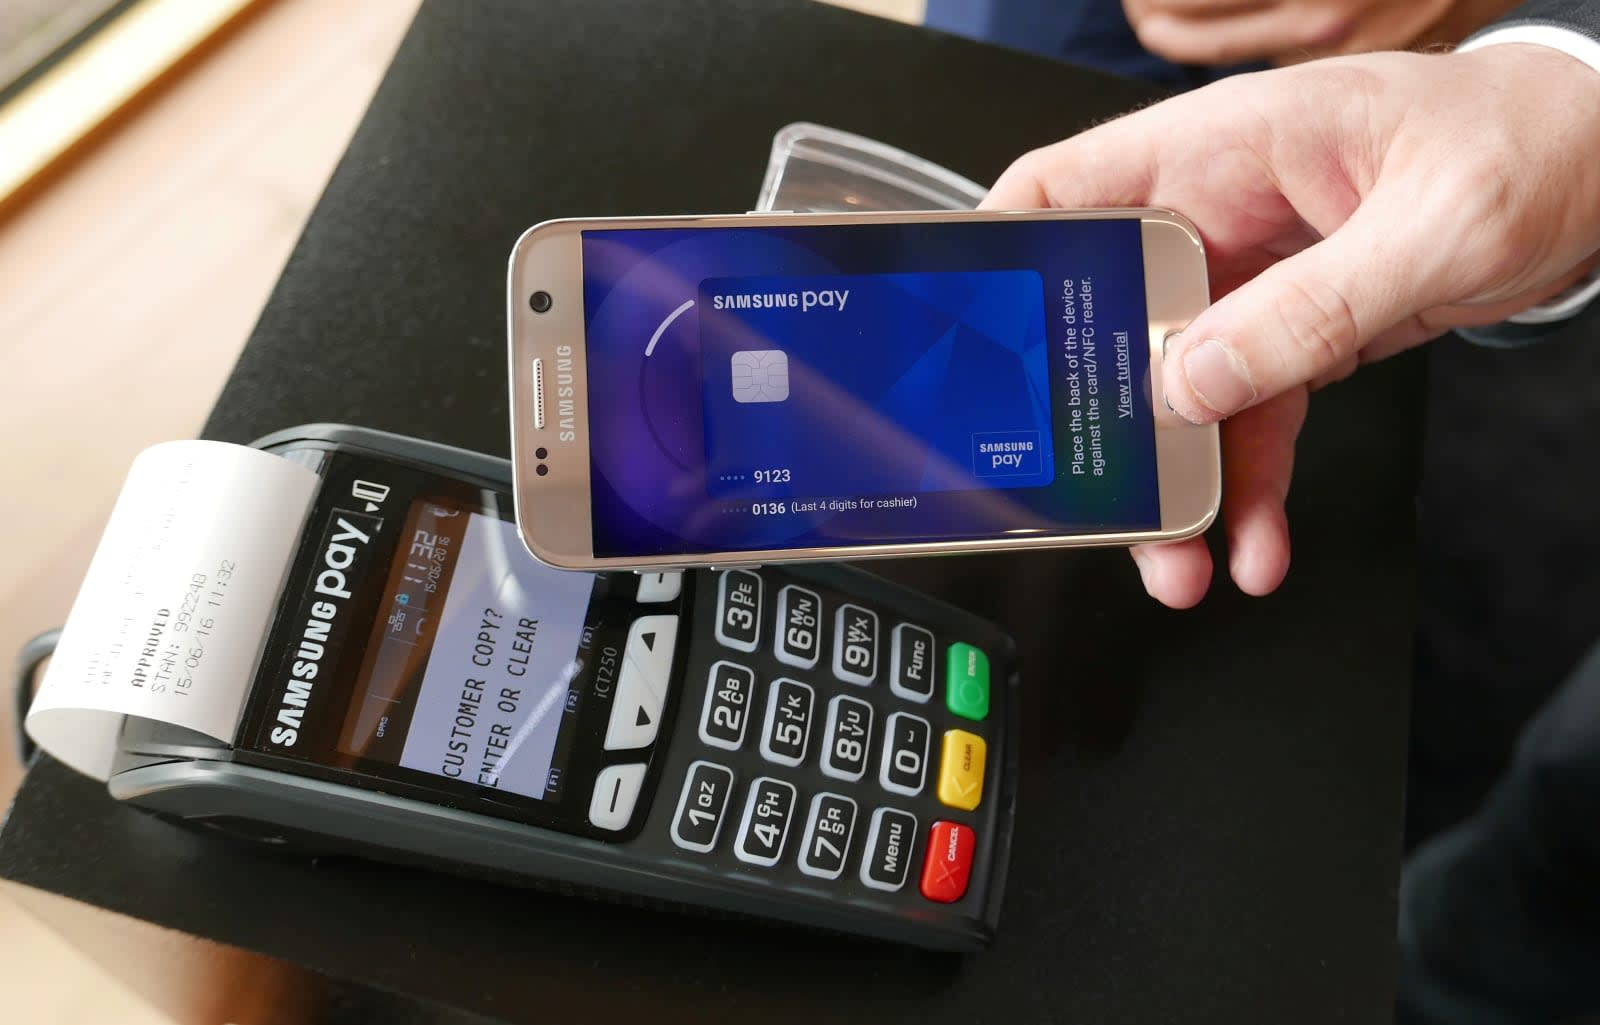 Samsung Pay adds new online payment options